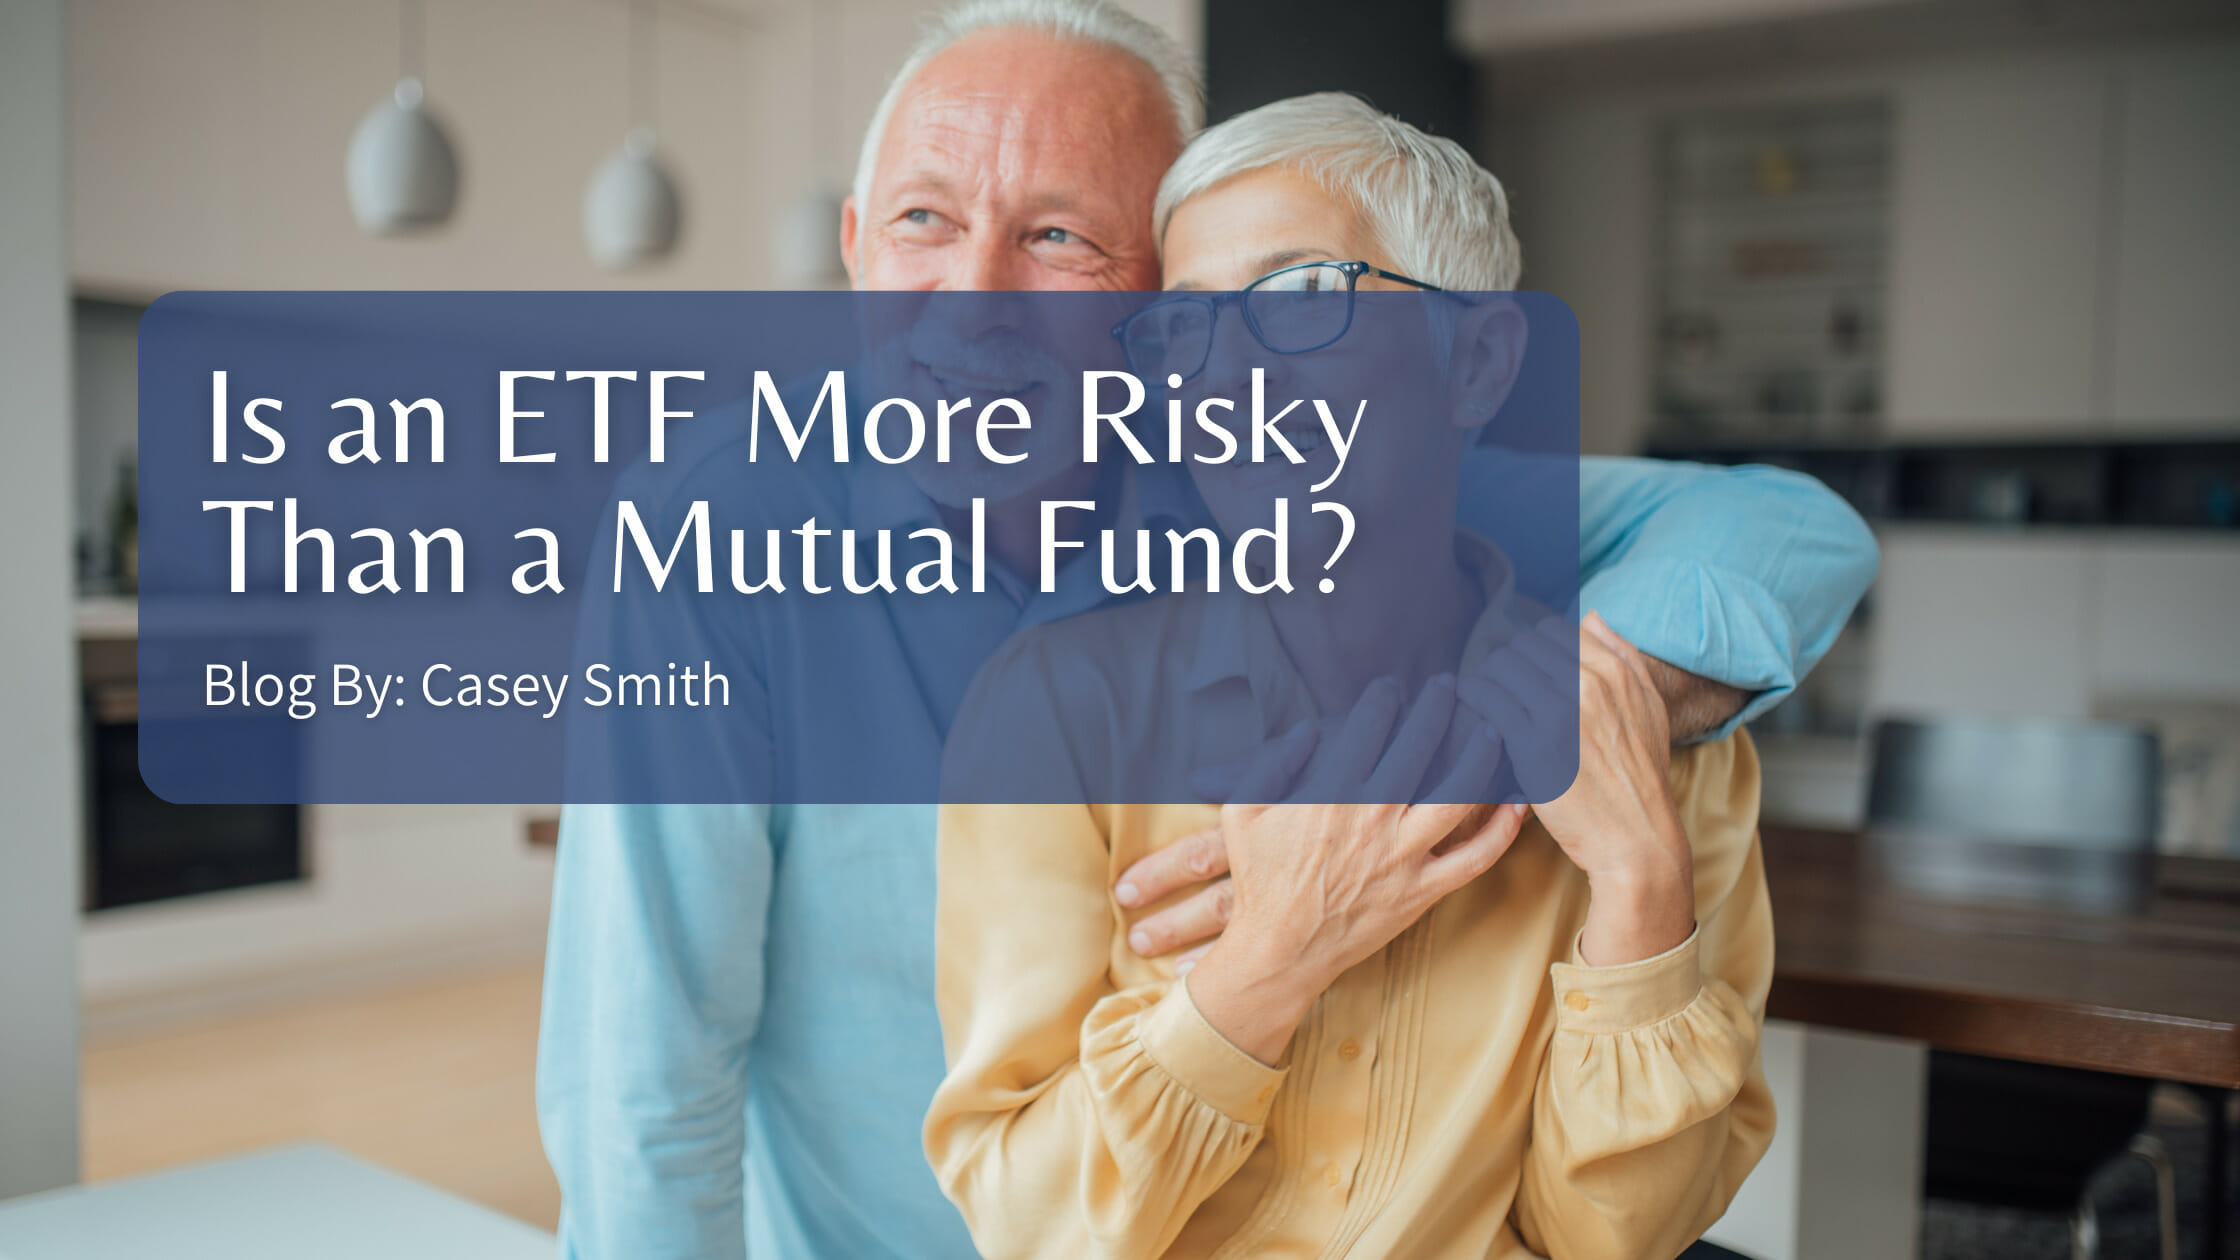 Is an ETF More Risky Than a Mutual Fund?